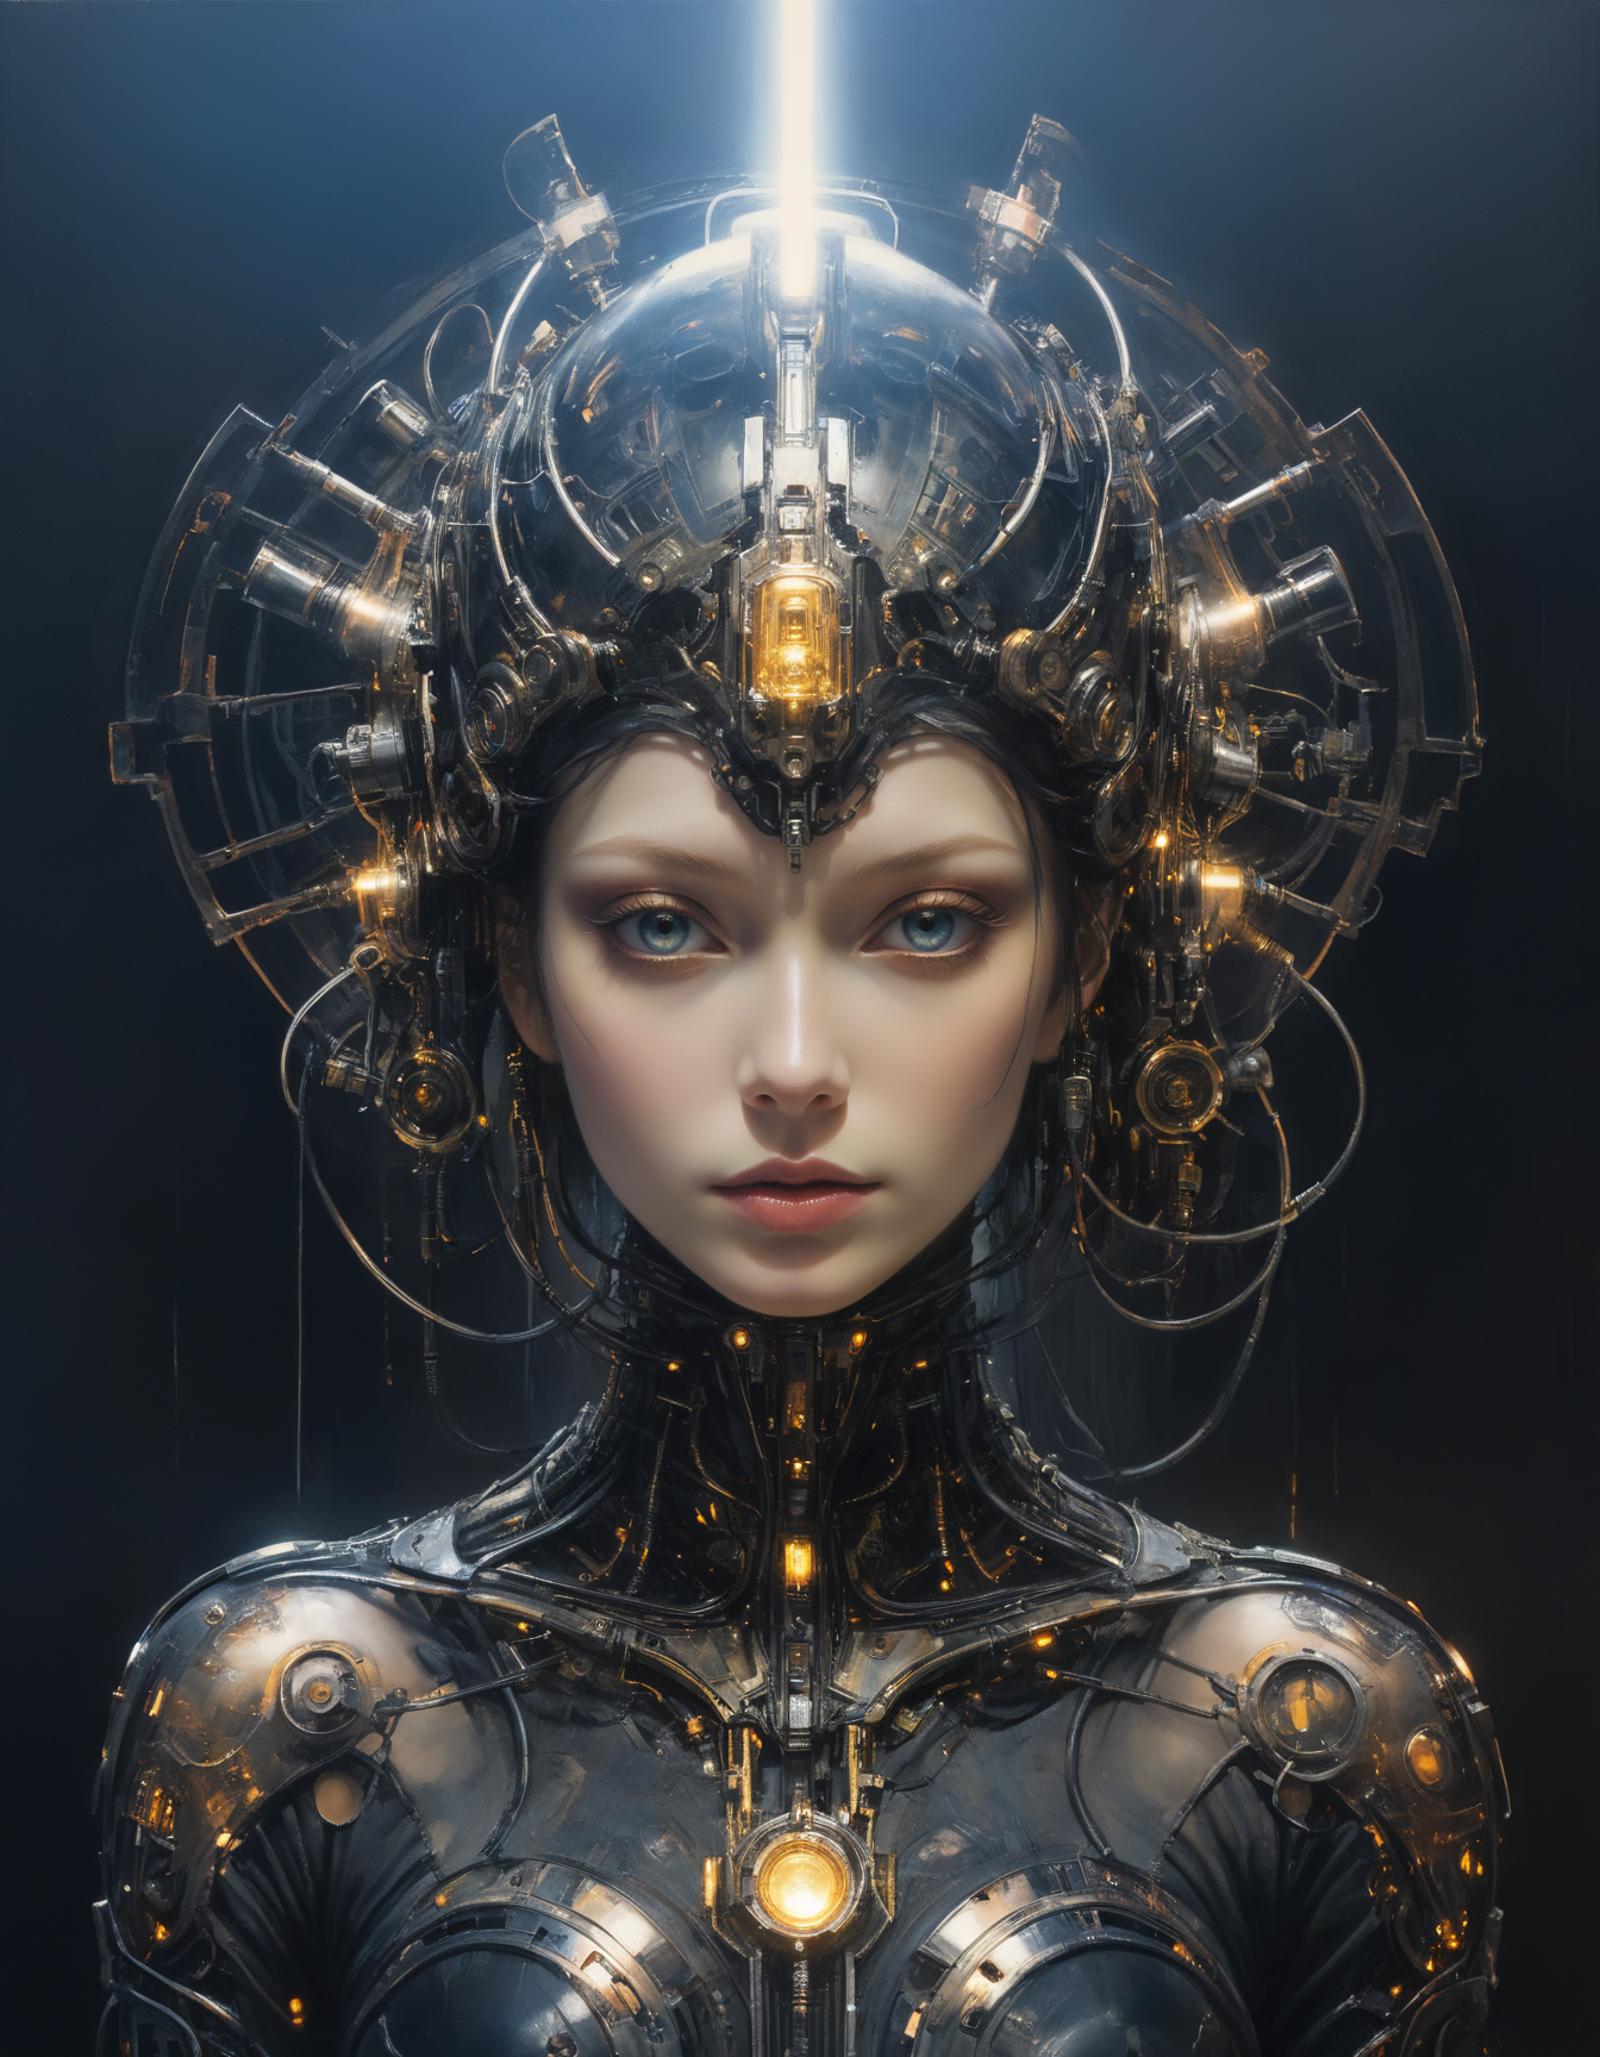 Futuristic Robotic Woman with Glowing Eyes and Golden Headpiece.